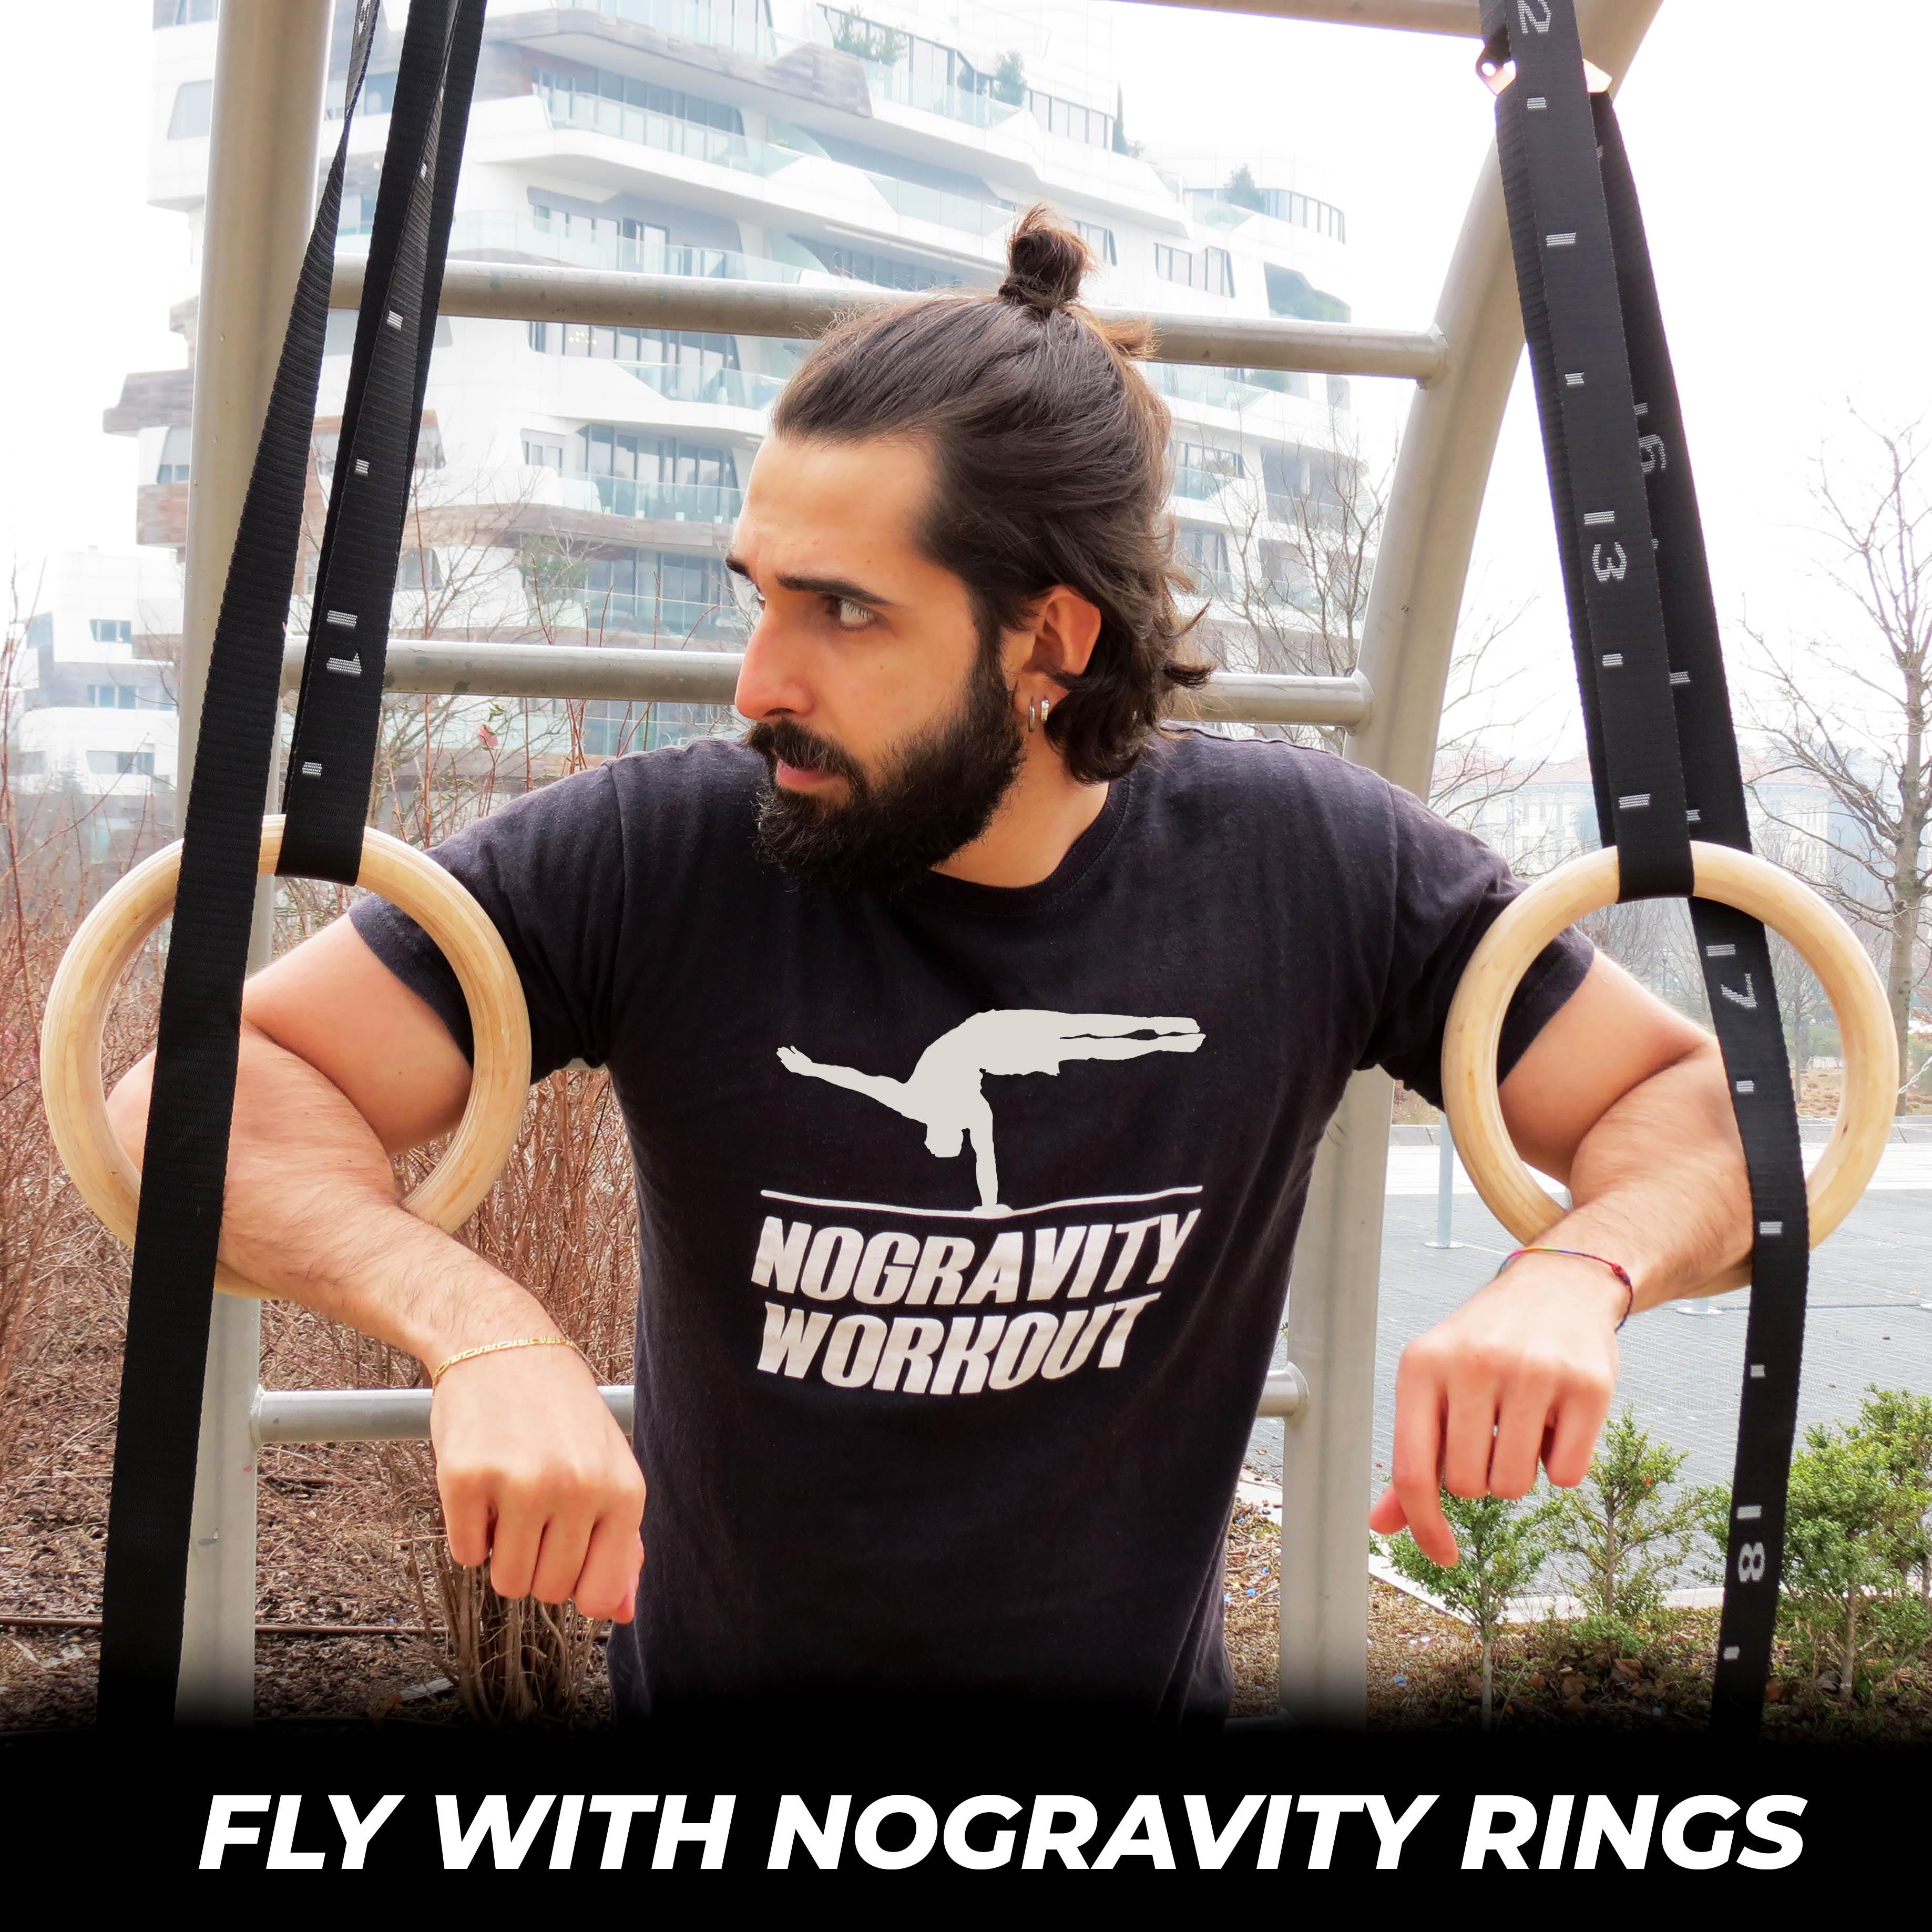 Gymnastic Wood Rings - NoGravityWorkout